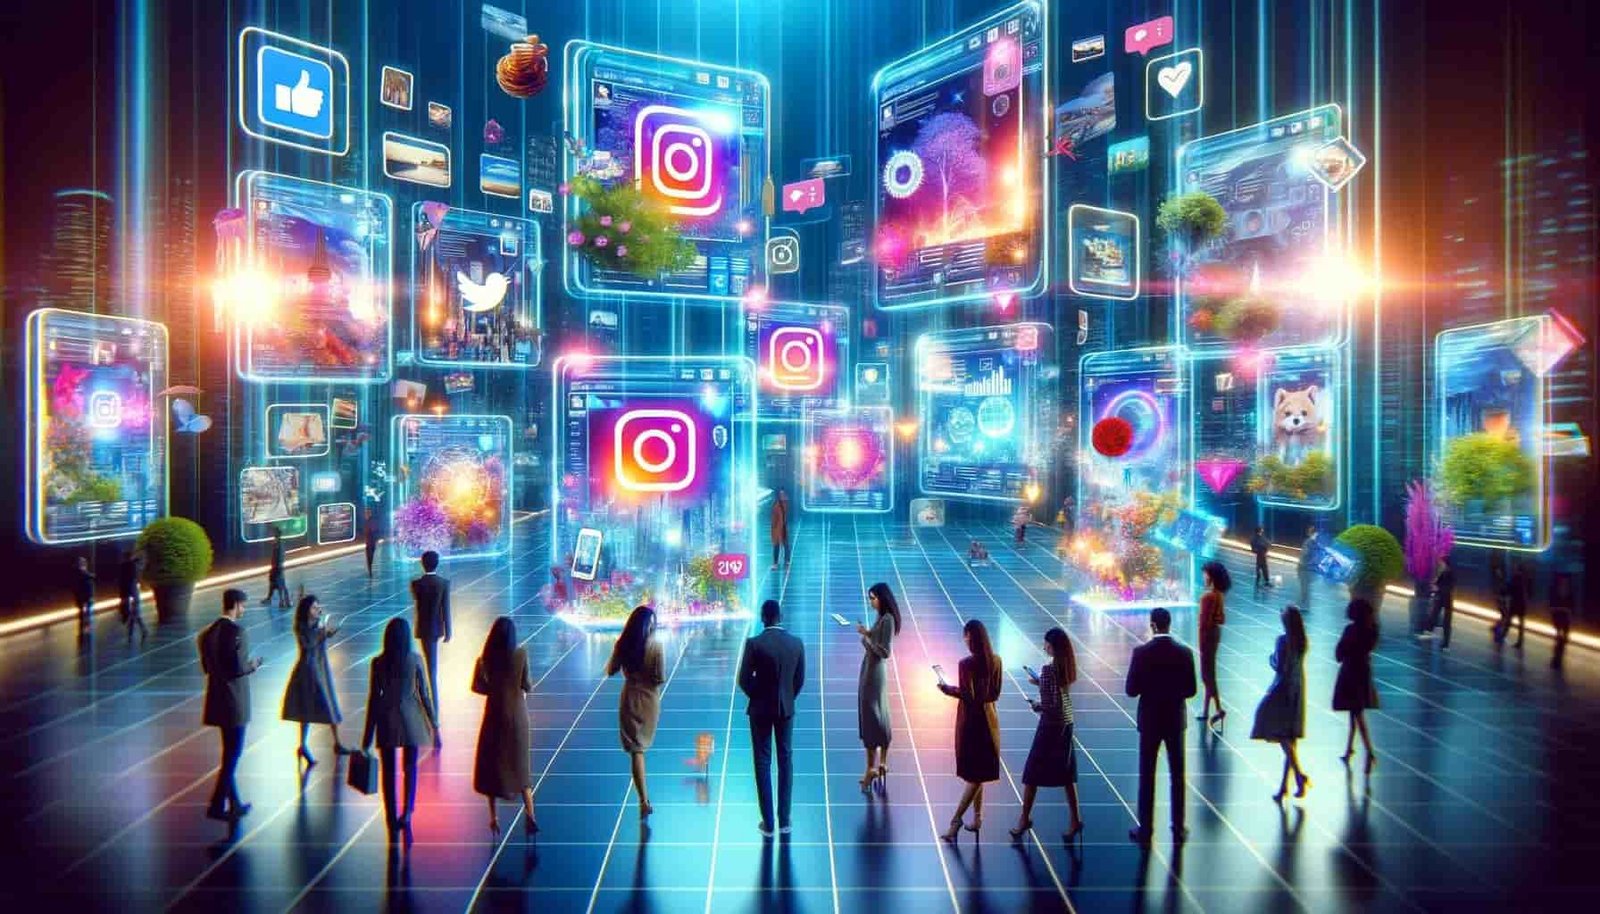 Learn how to buy Instagram accounts in a bustling virtual marketplace, with people interacting with dynamic holographic displays offering a variety of Instagram profiles for purchase.